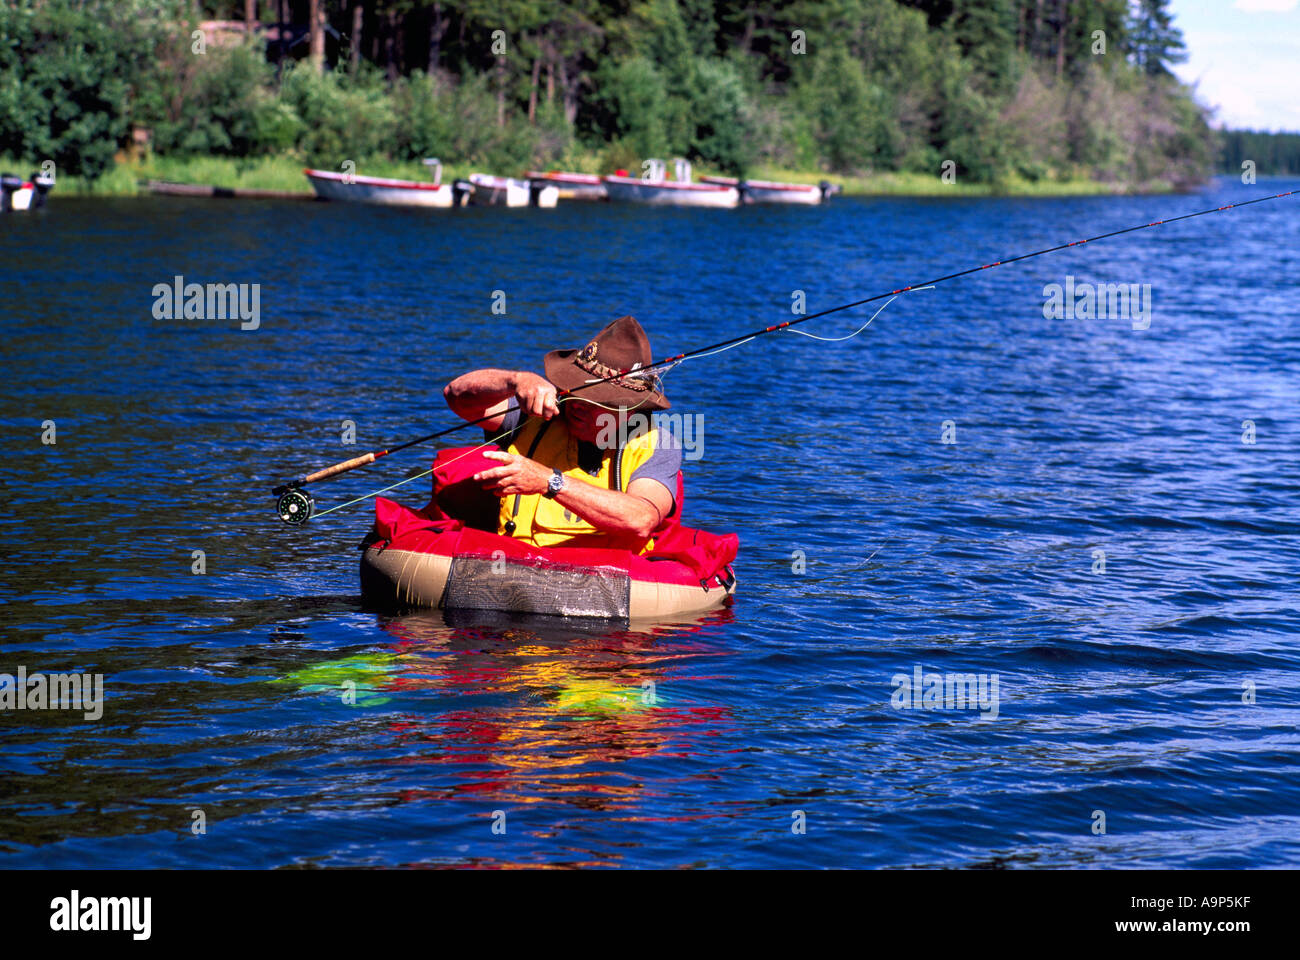 https://c8.alamy.com/comp/A9P5KF/fly-fisherman-in-a-belly-boat-fishing-for-trout-in-hi-hium-lake-in-A9P5KF.jpg